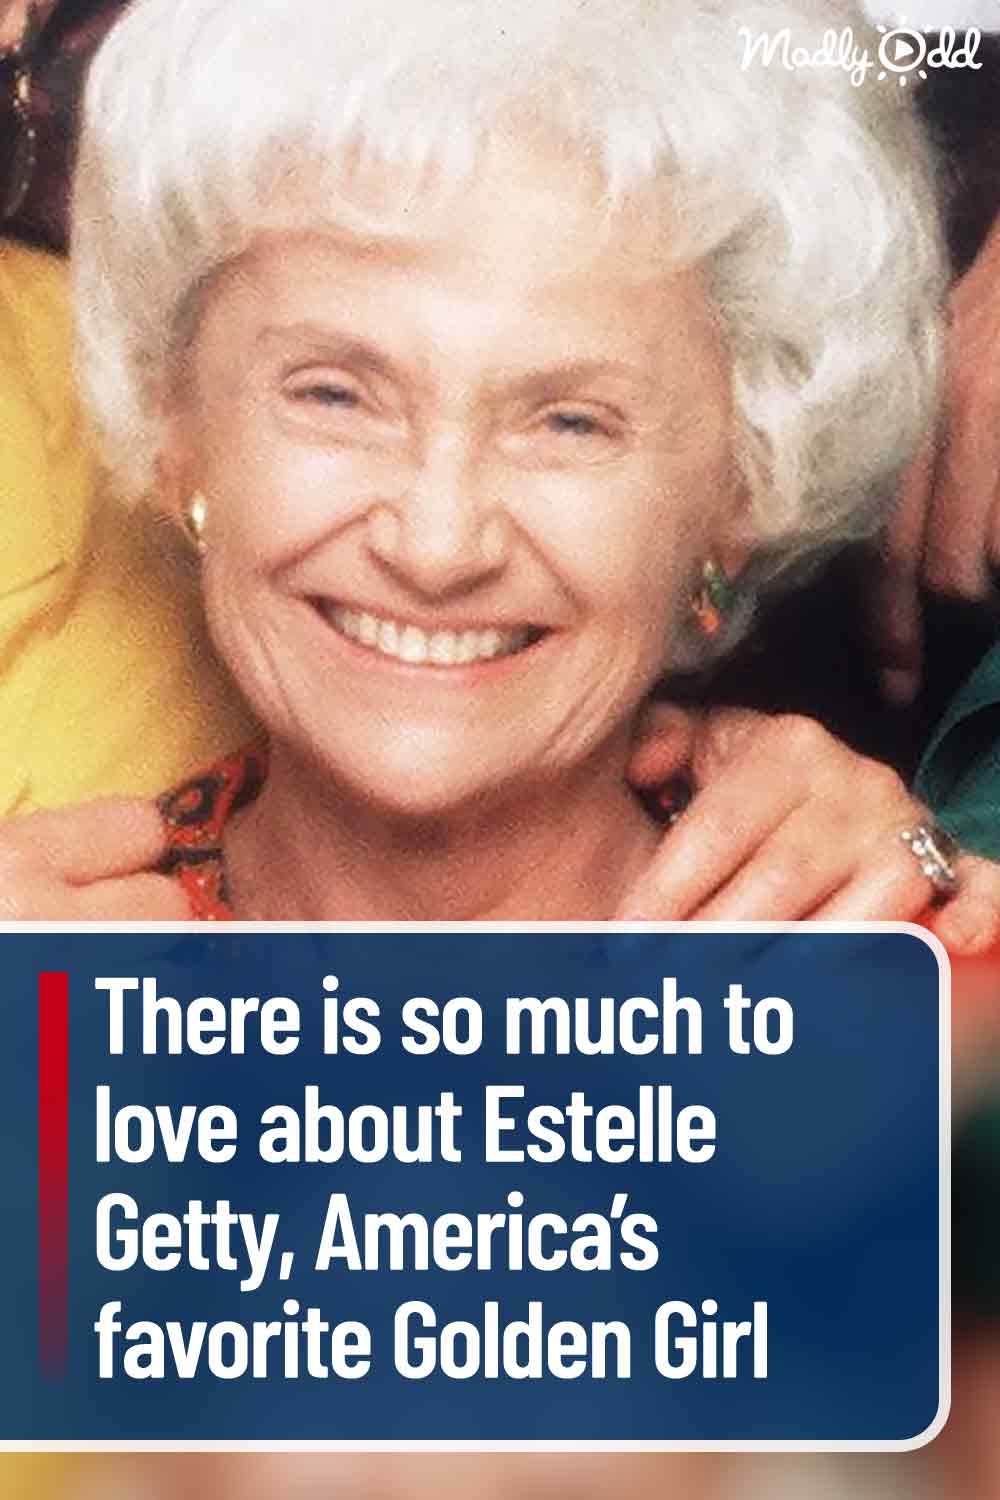 There is so much to love about Estelle Getty, America’s favorite Golden Girl